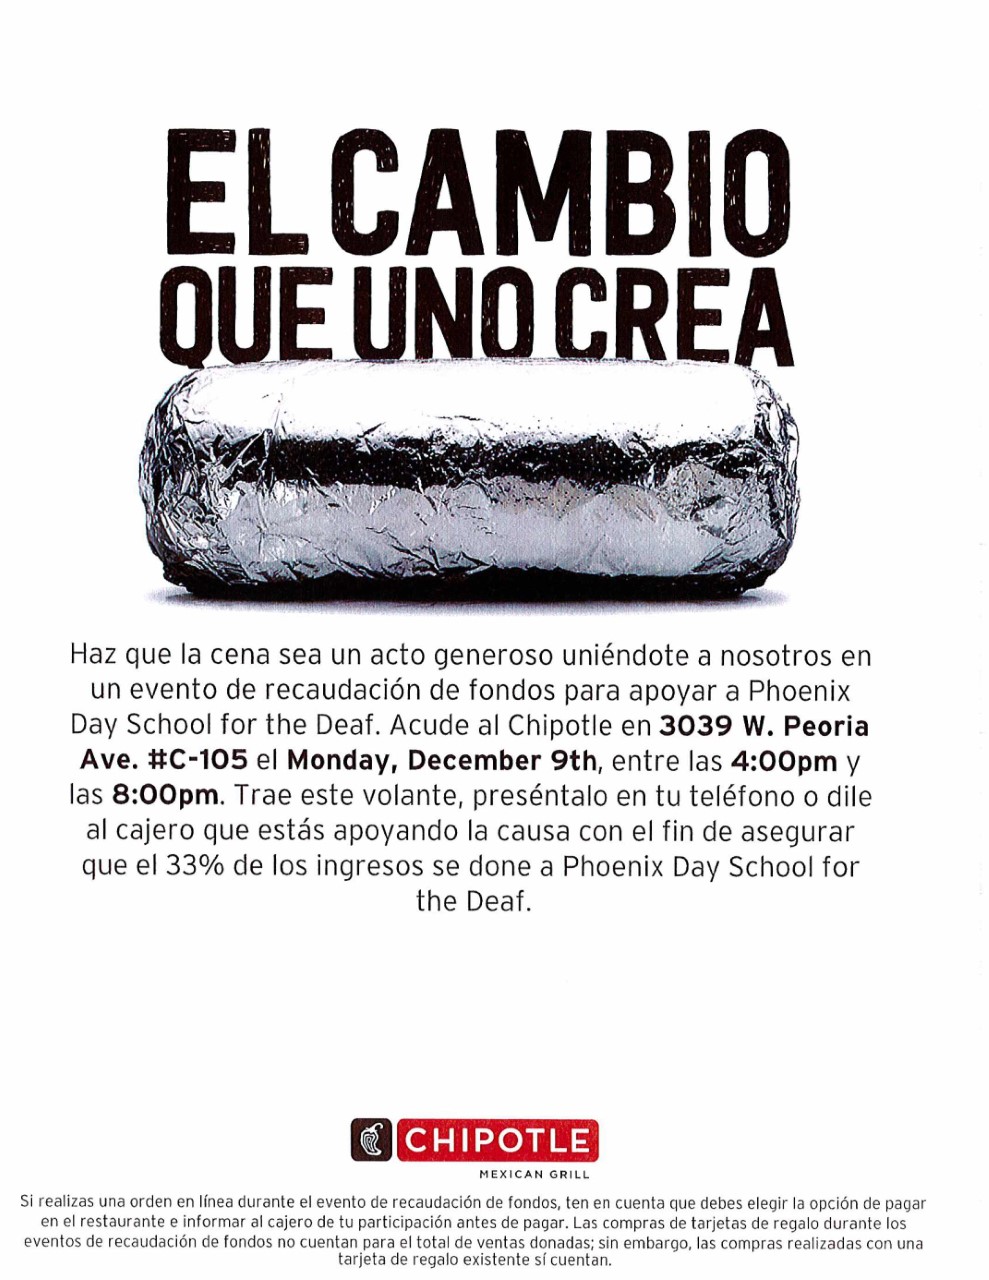 There is a burrito wrapped in aluminum foil. Above it, there is a bold lettering, "Do Good with Burritos". Below it, there is a Chipotle logo showing white drawing of a pepper in brown square. Next to it is a red rectangular box with white lettering “Chipotle”. Under the red box have a smaller print, “Mexican Grill”